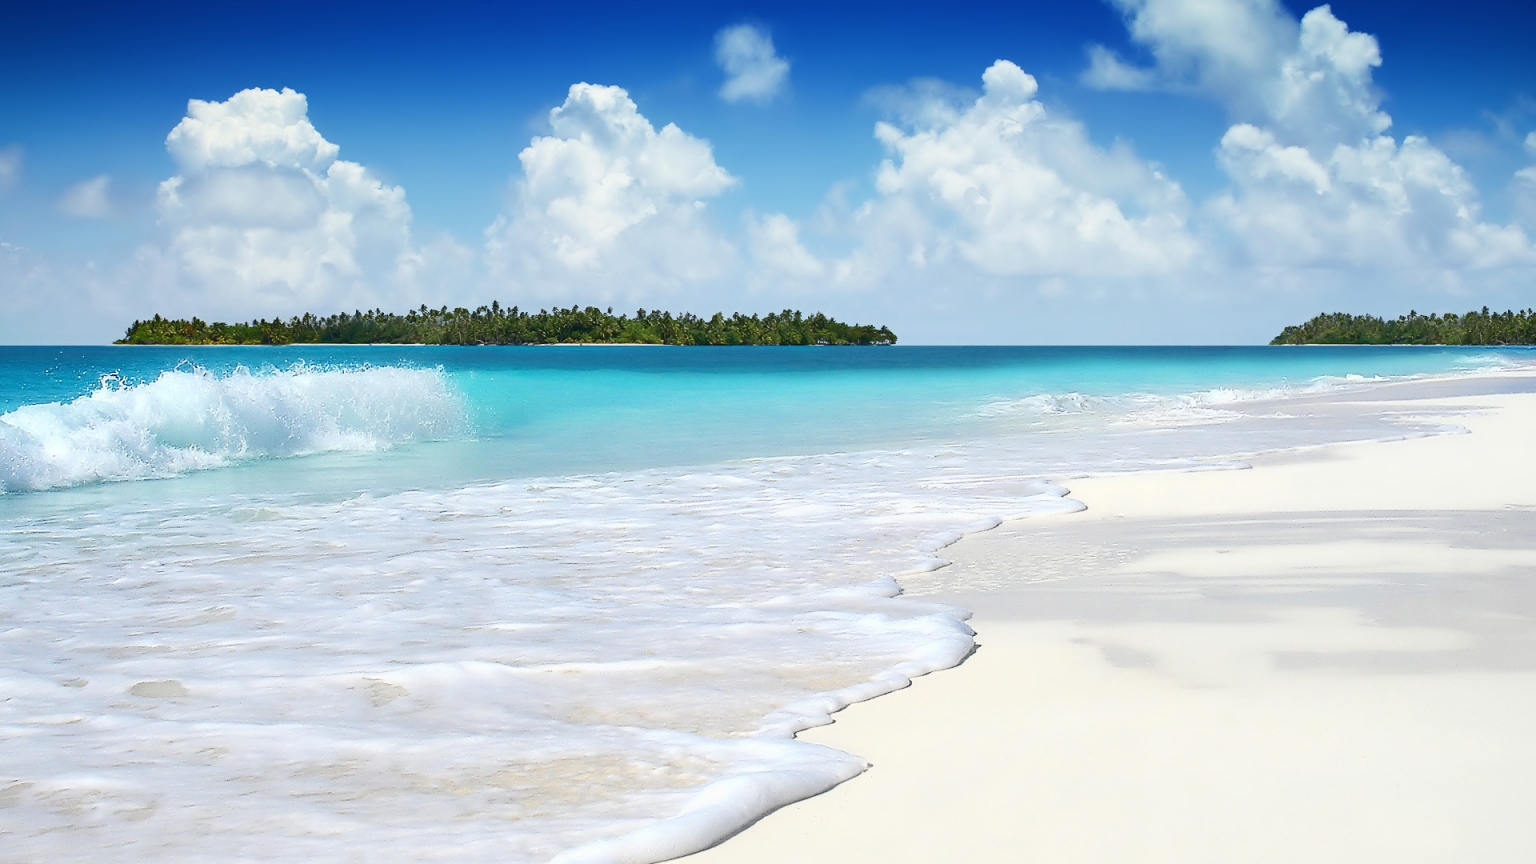 The Beautiful Summer Island for 1536 x 864 HDTV resolution